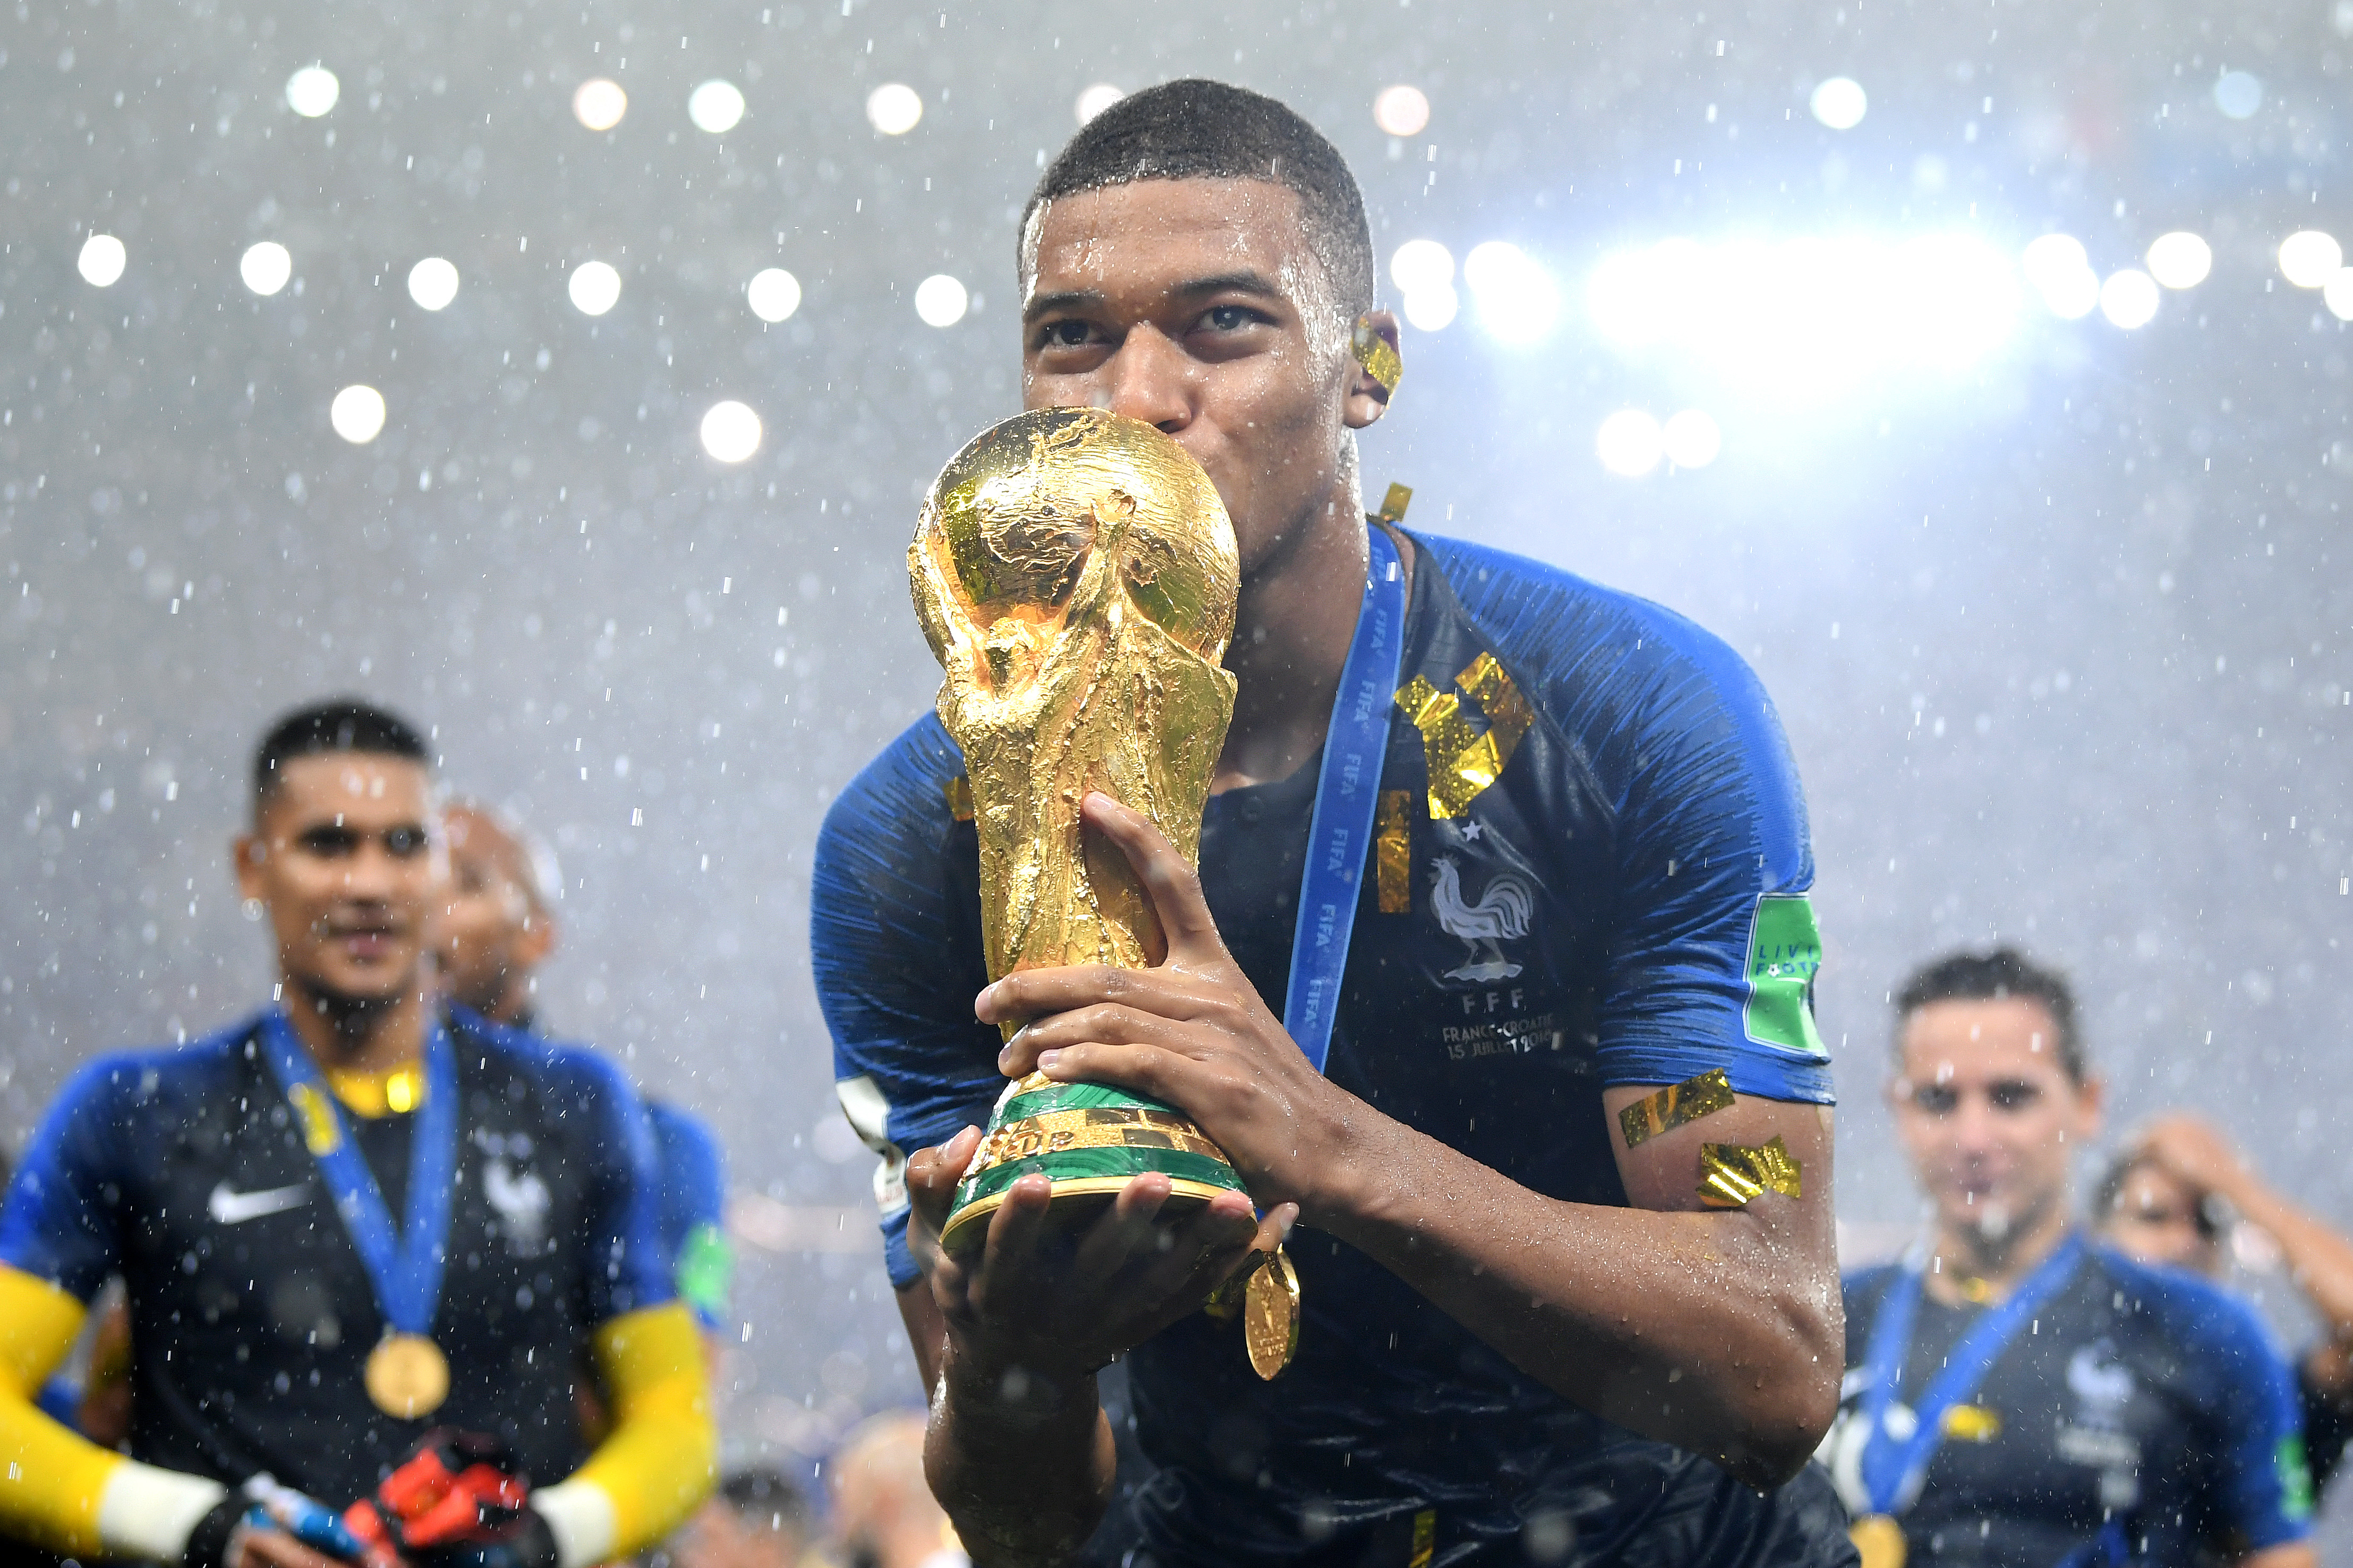 FIFA World Cup 2018 winners: France win second title in 20 years